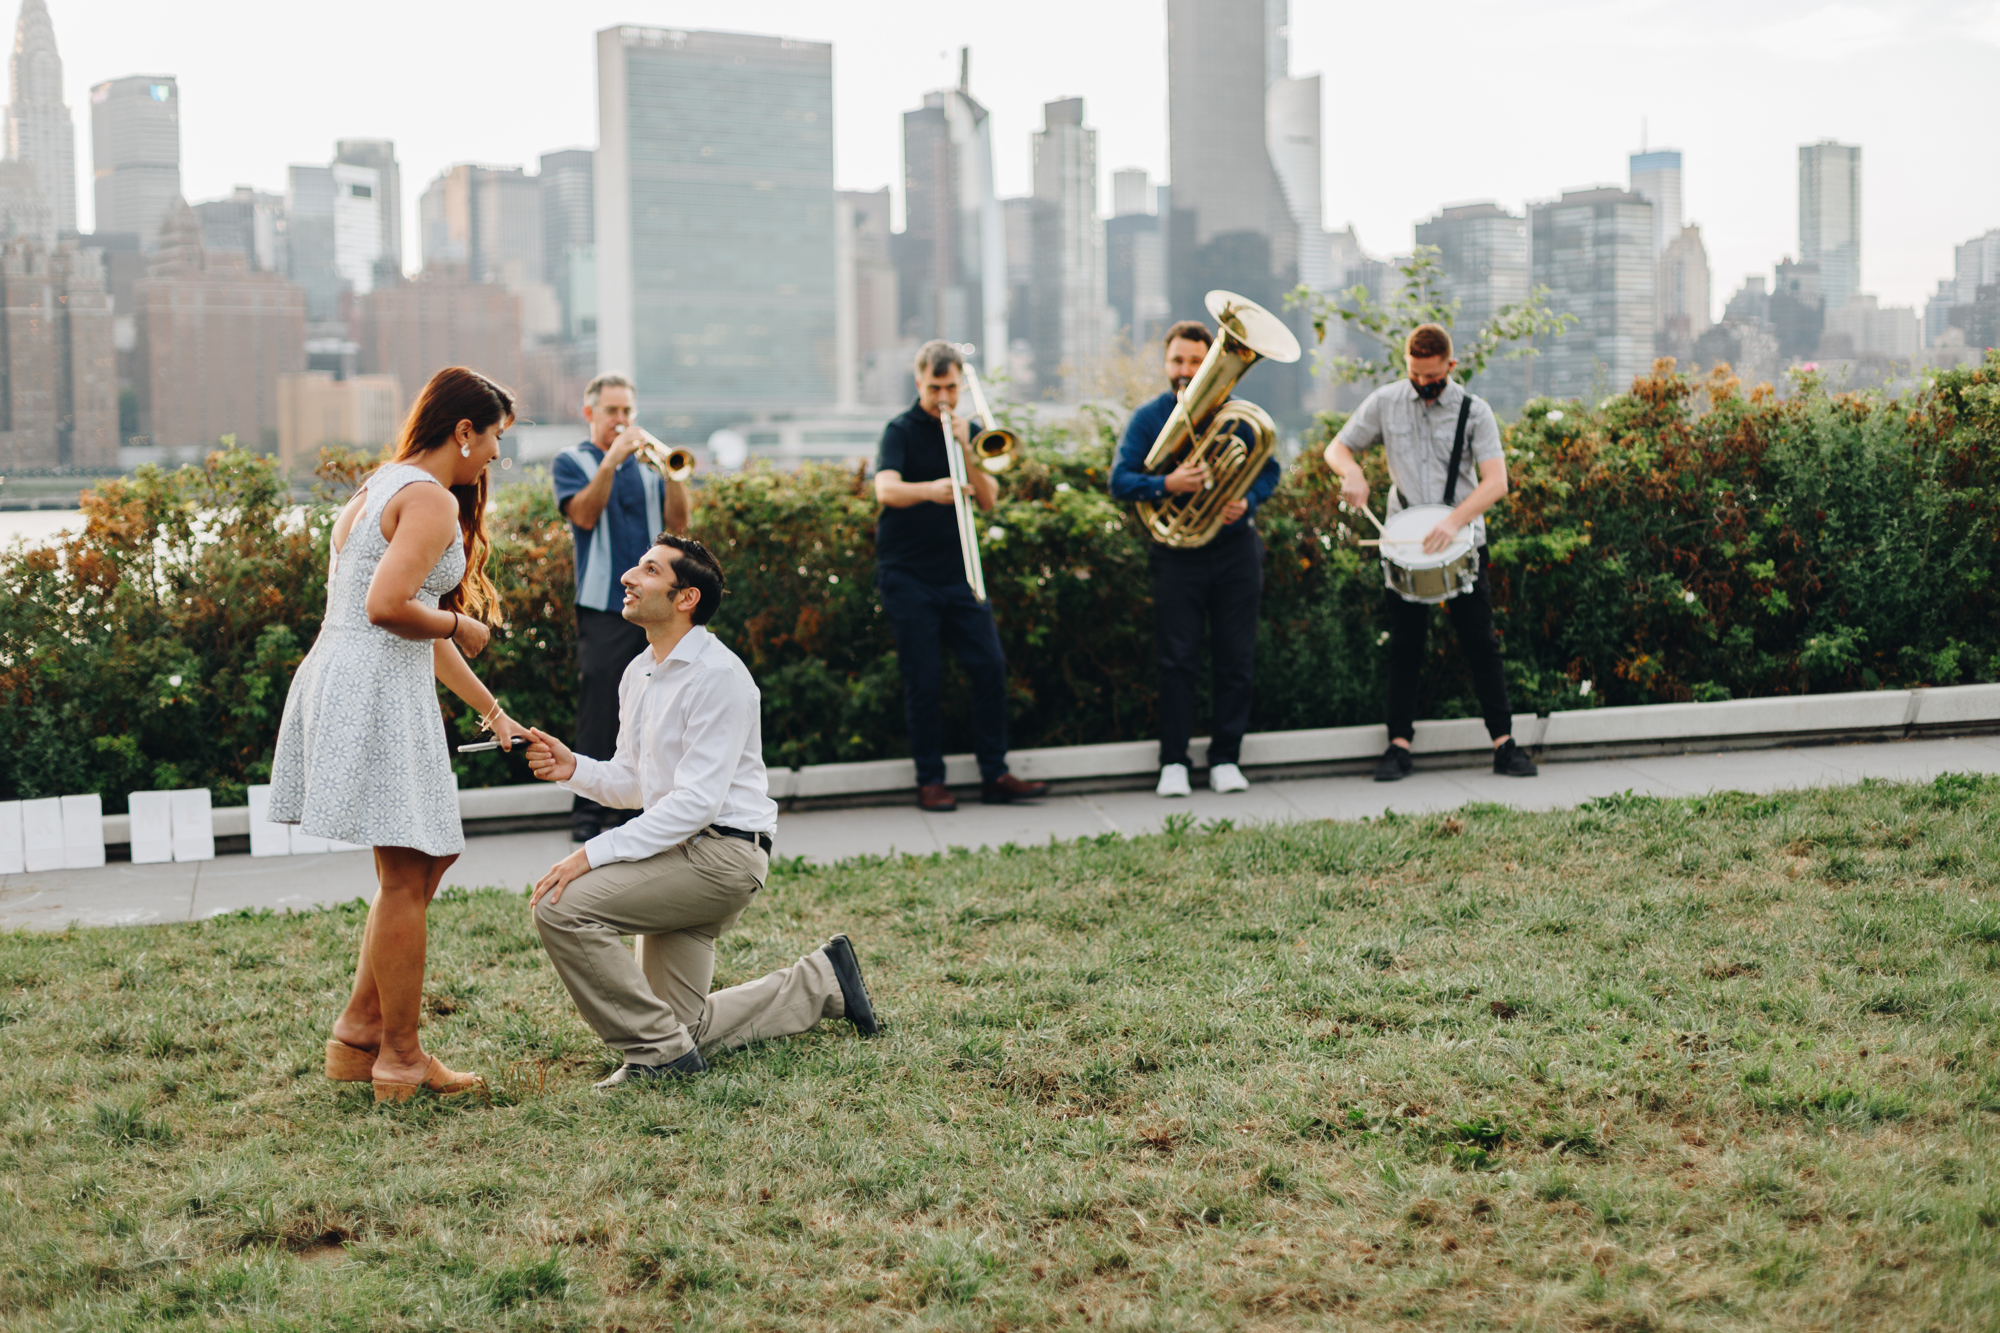 Picturesque Places to Propose in NYC